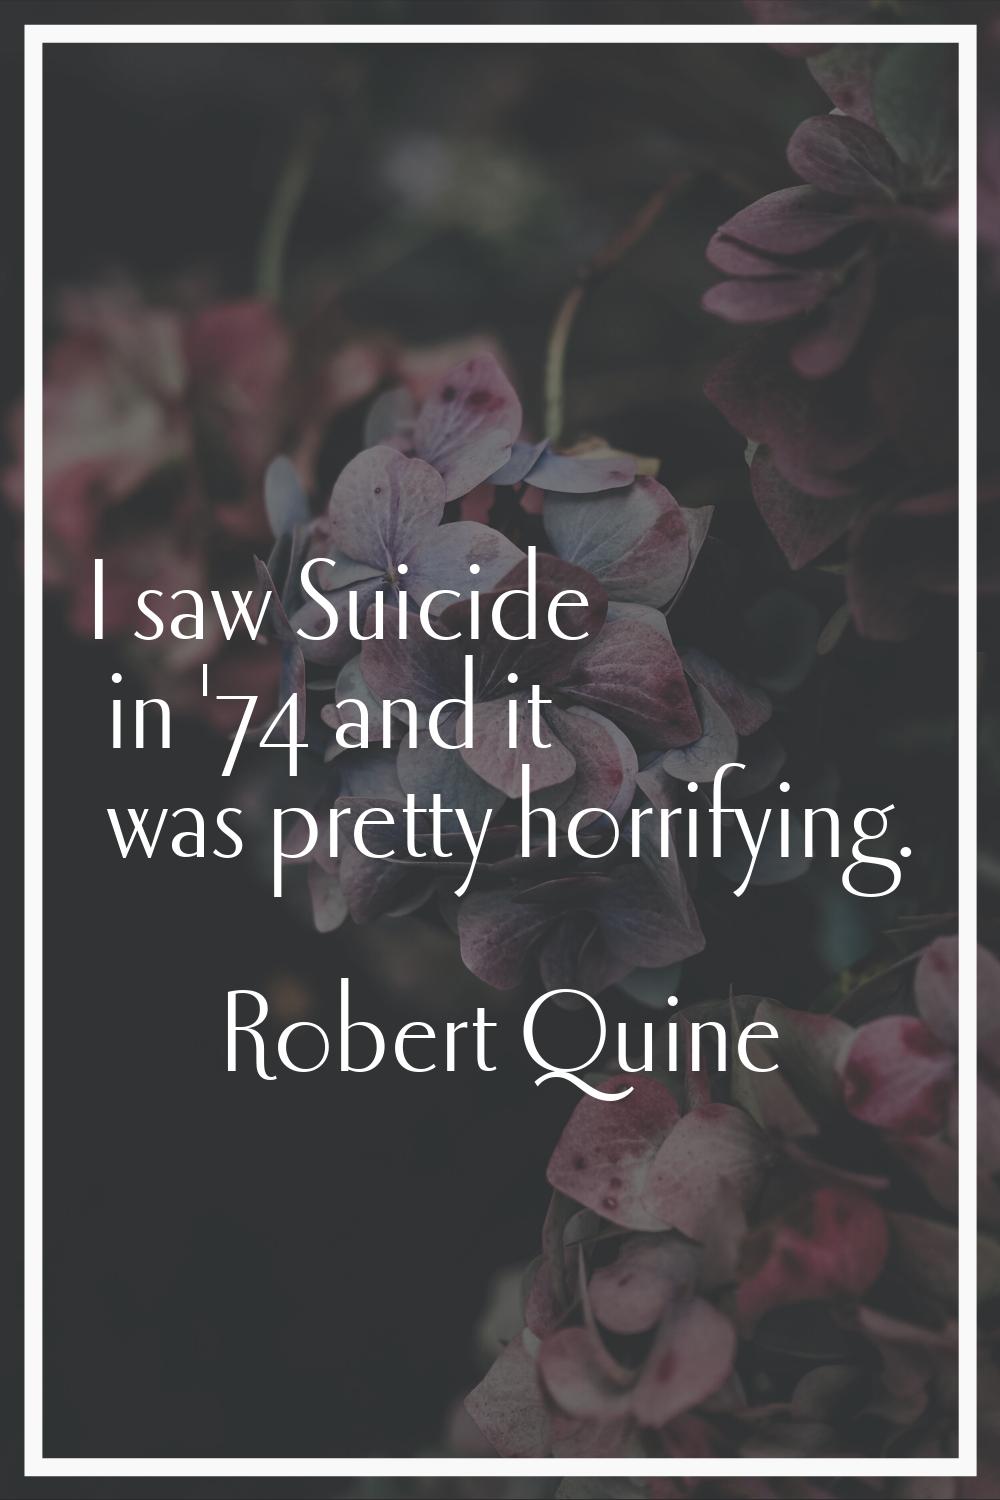 I saw Suicide in '74 and it was pretty horrifying.